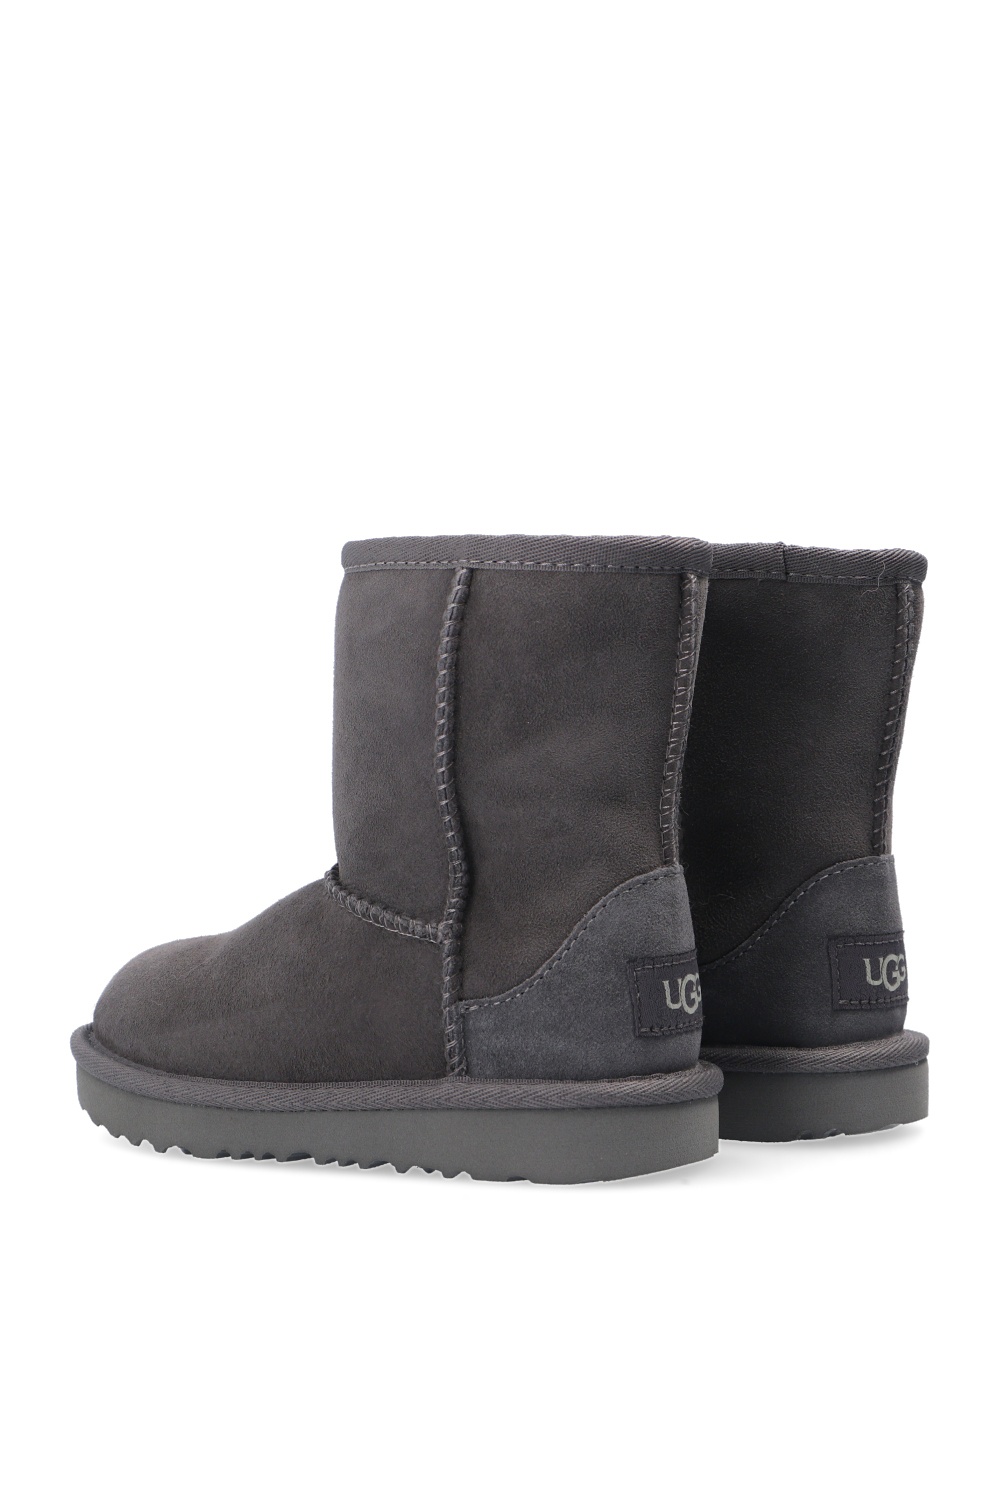 UGG Kids ‘T-Classic’ brown snow boots